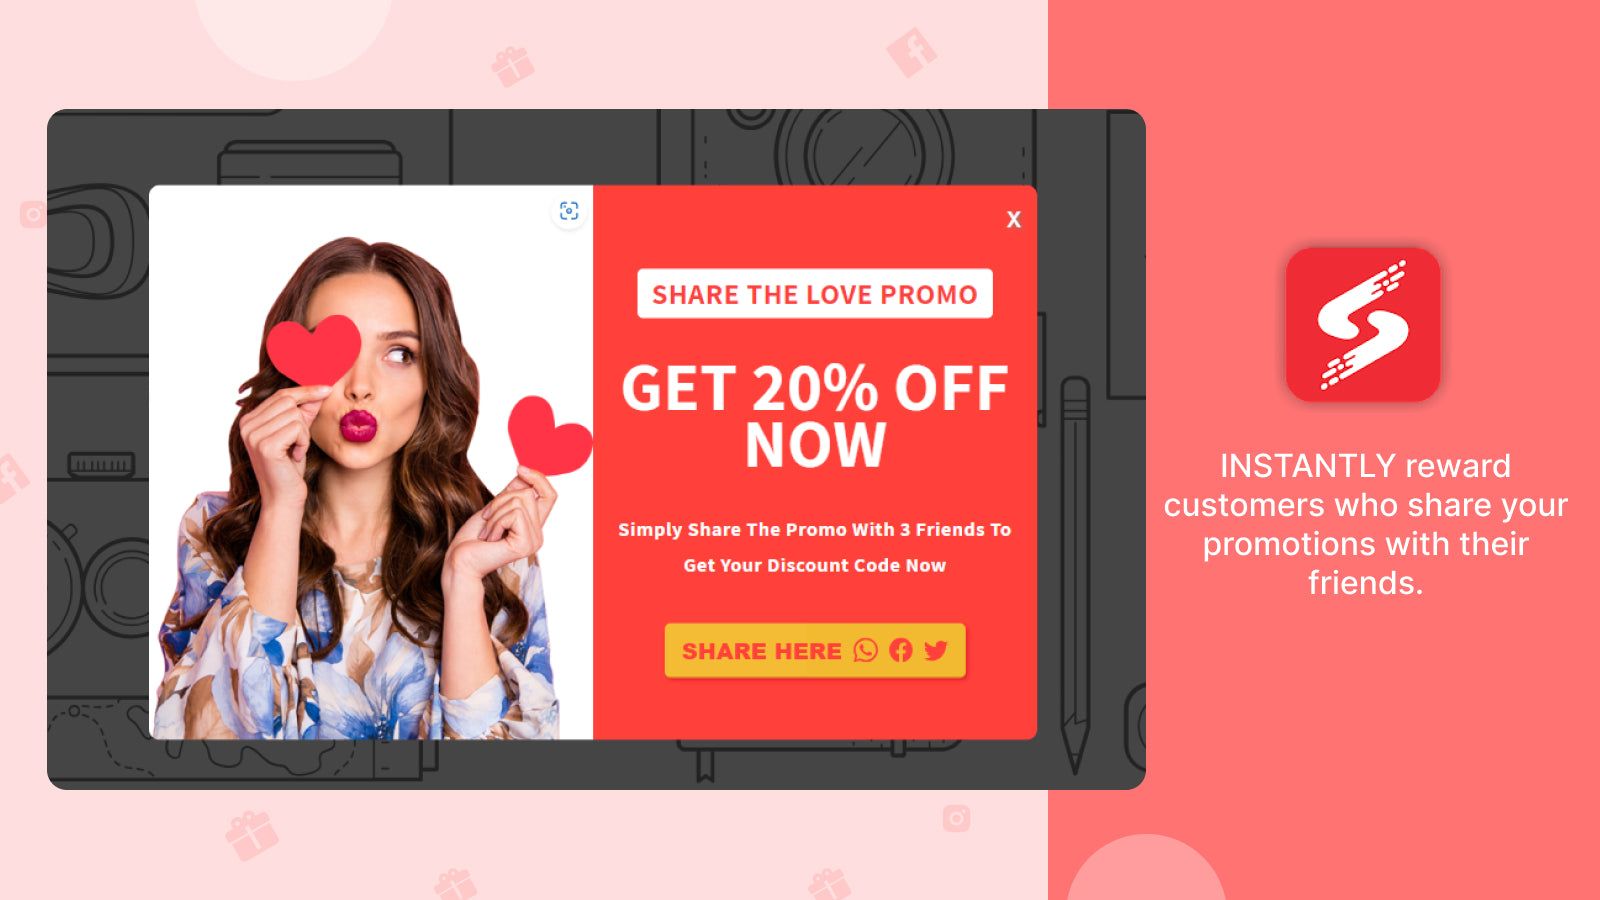 INSTANTLY reward customers who share promos with their friends